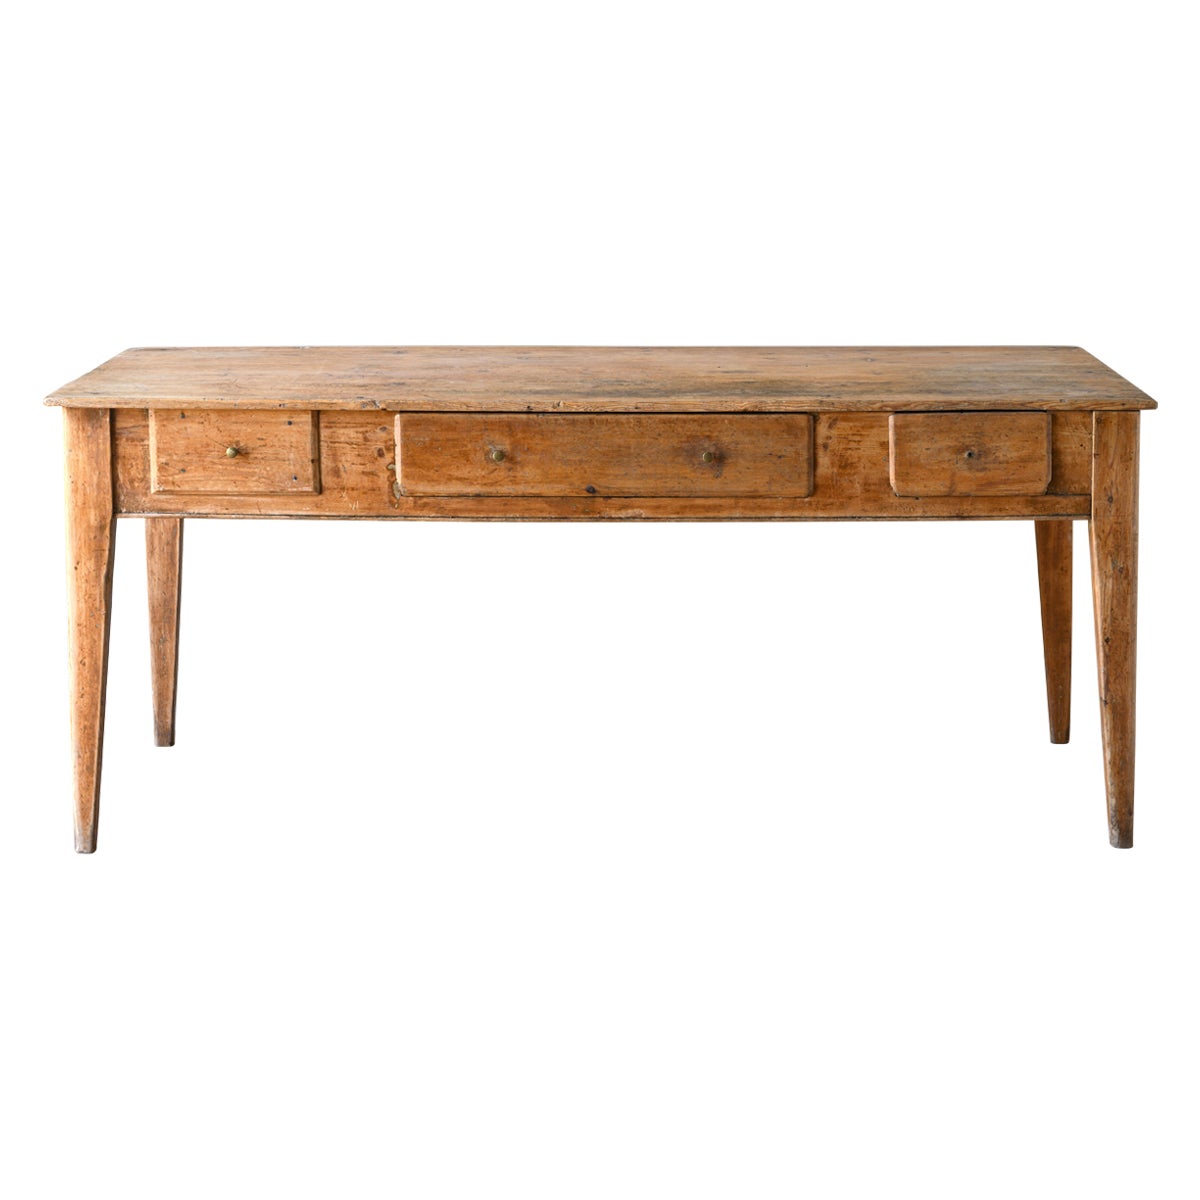 19th Century Swedish Provincial Table For Sale